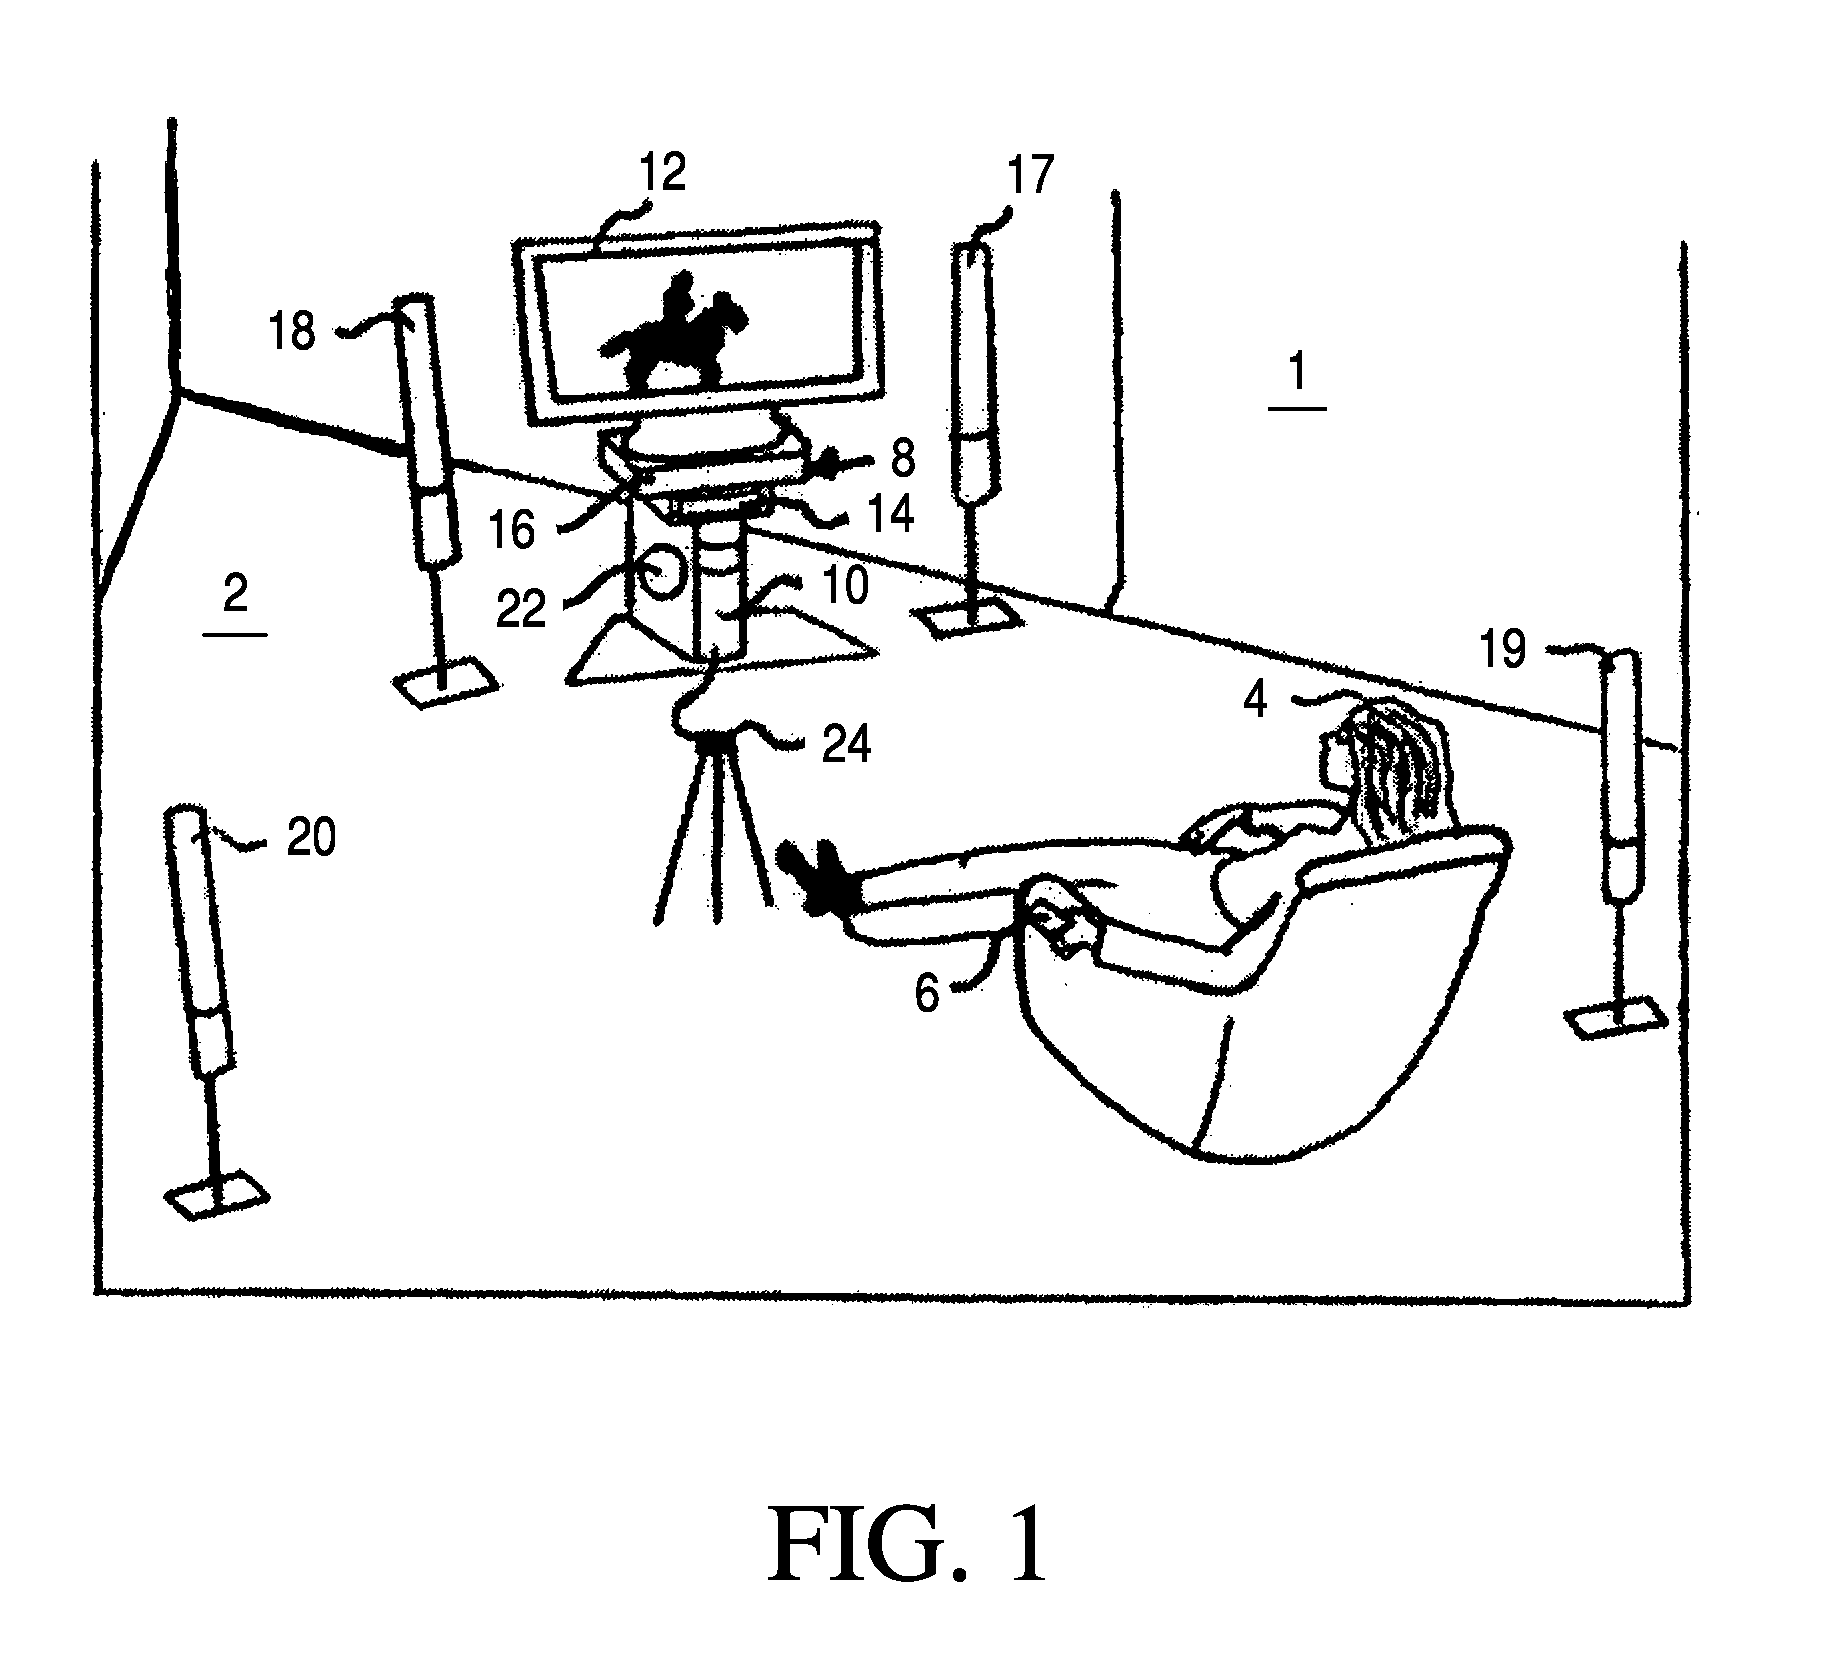 Method and support structure for integrating audio and video components